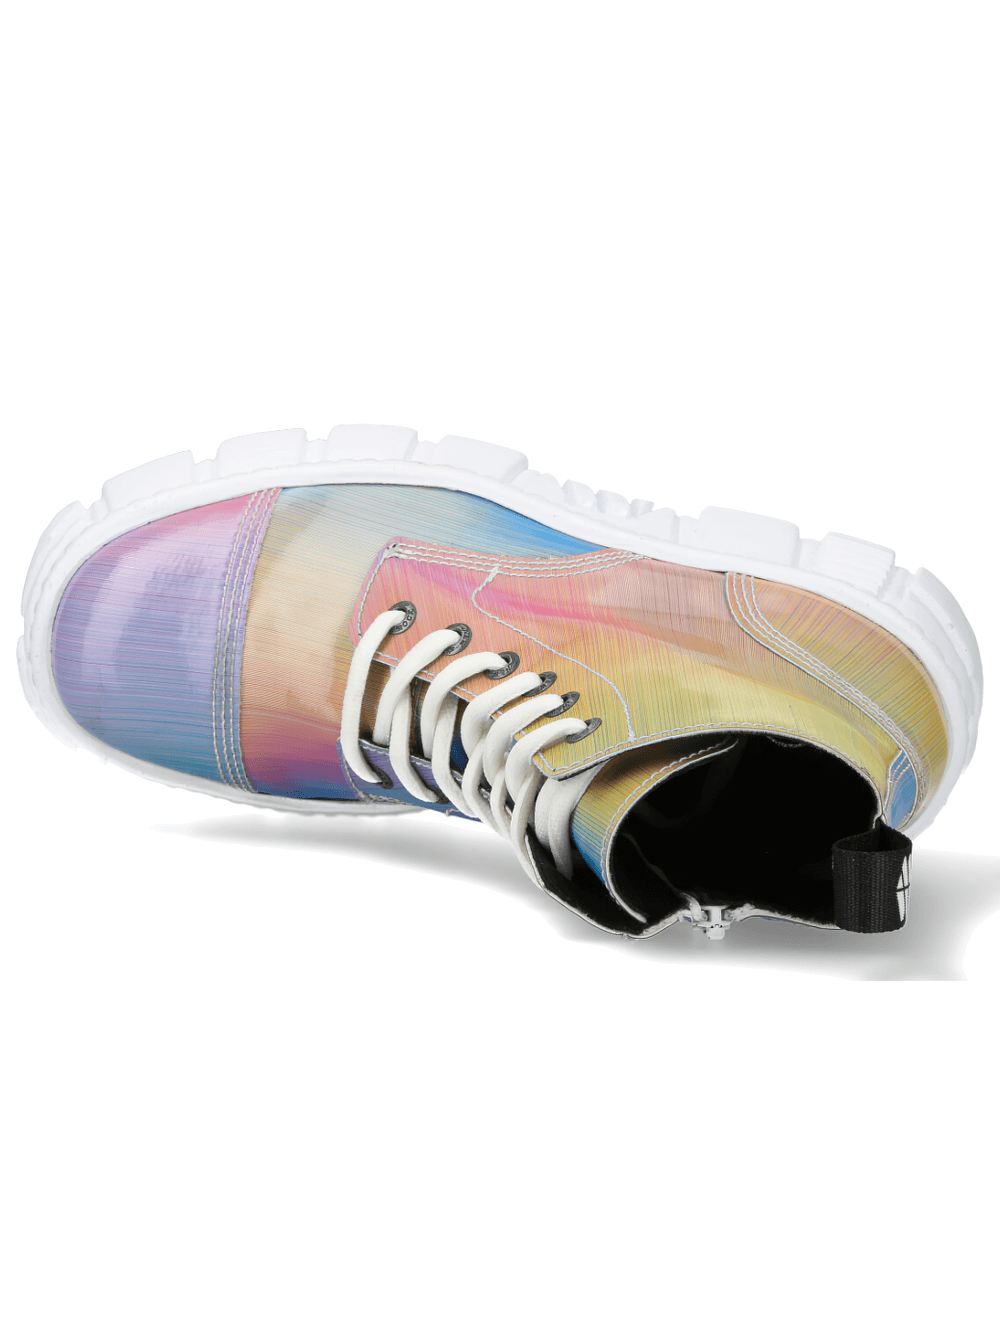 NEW ROCK Iridescent Rainbow Ankle Boots with Laces